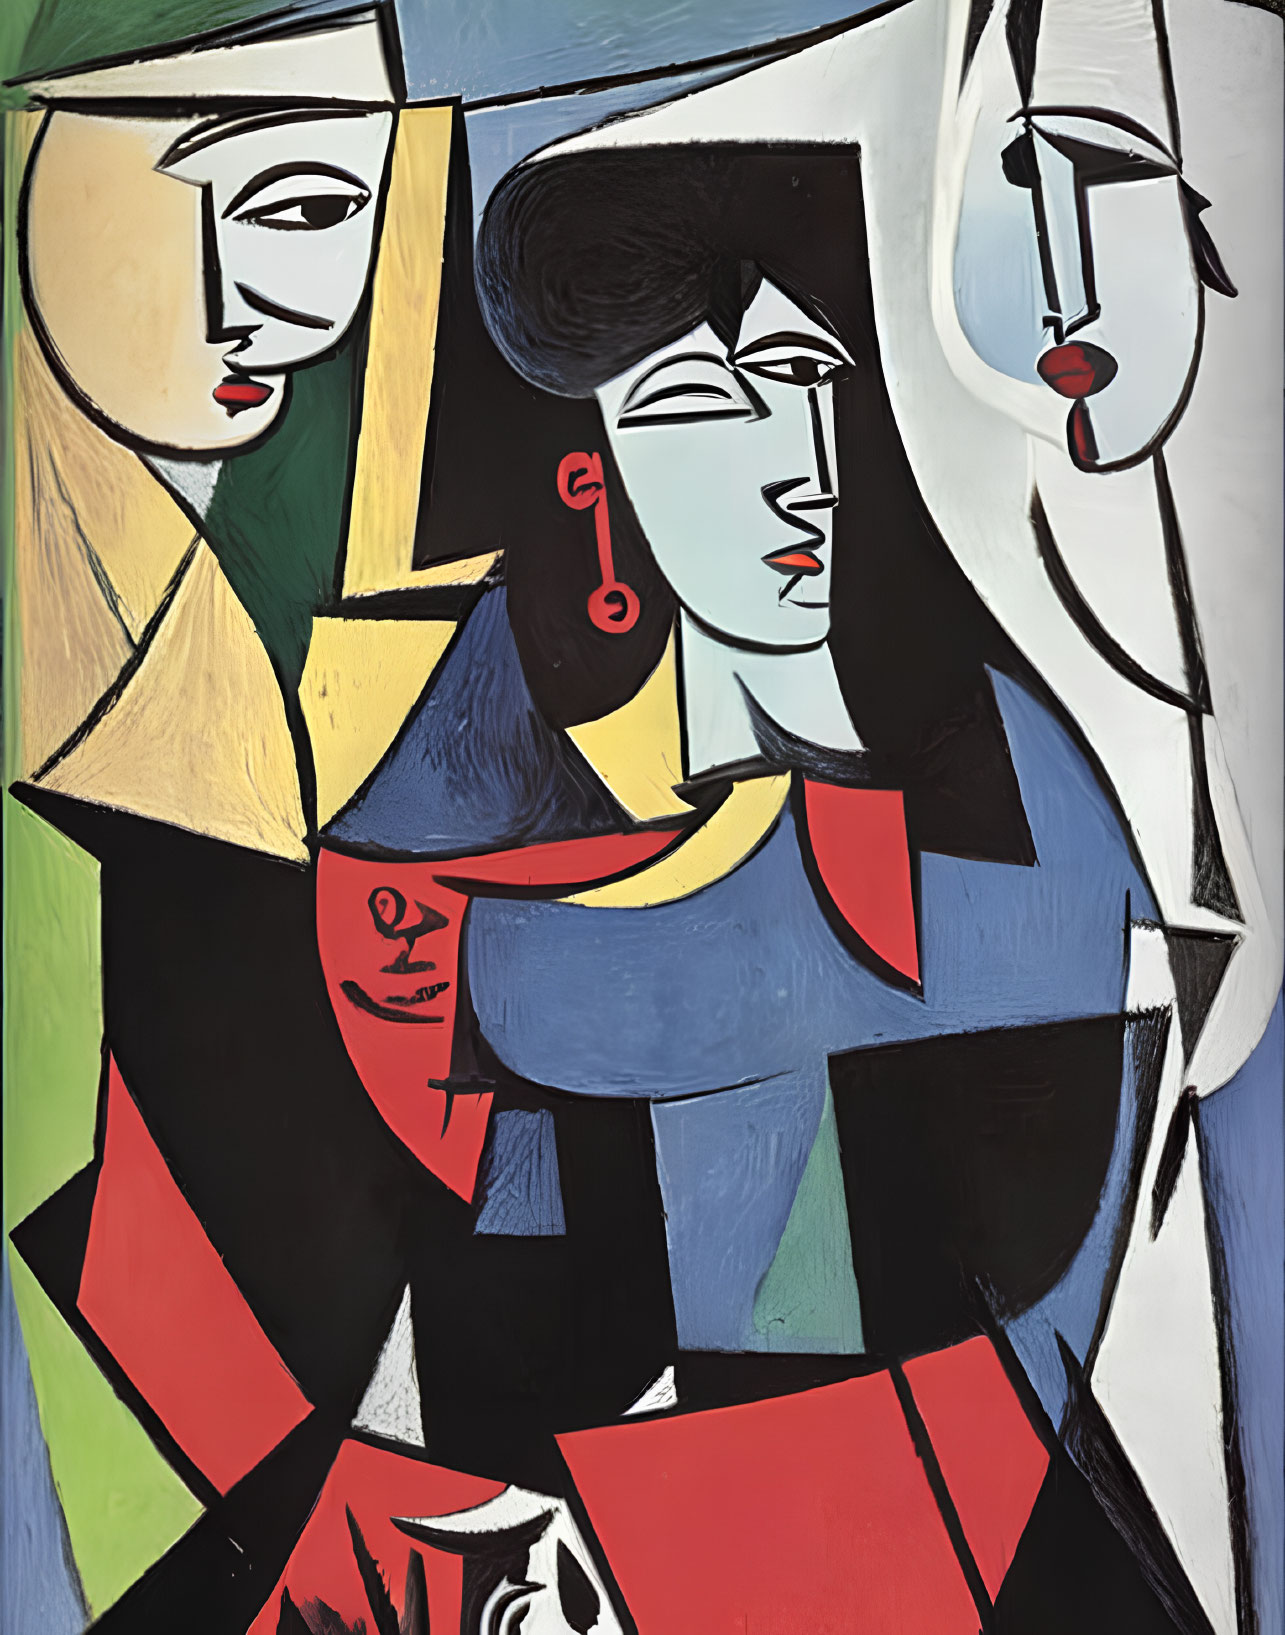 Cubist painting with bold shapes of three figures in black, white, red, and blue.